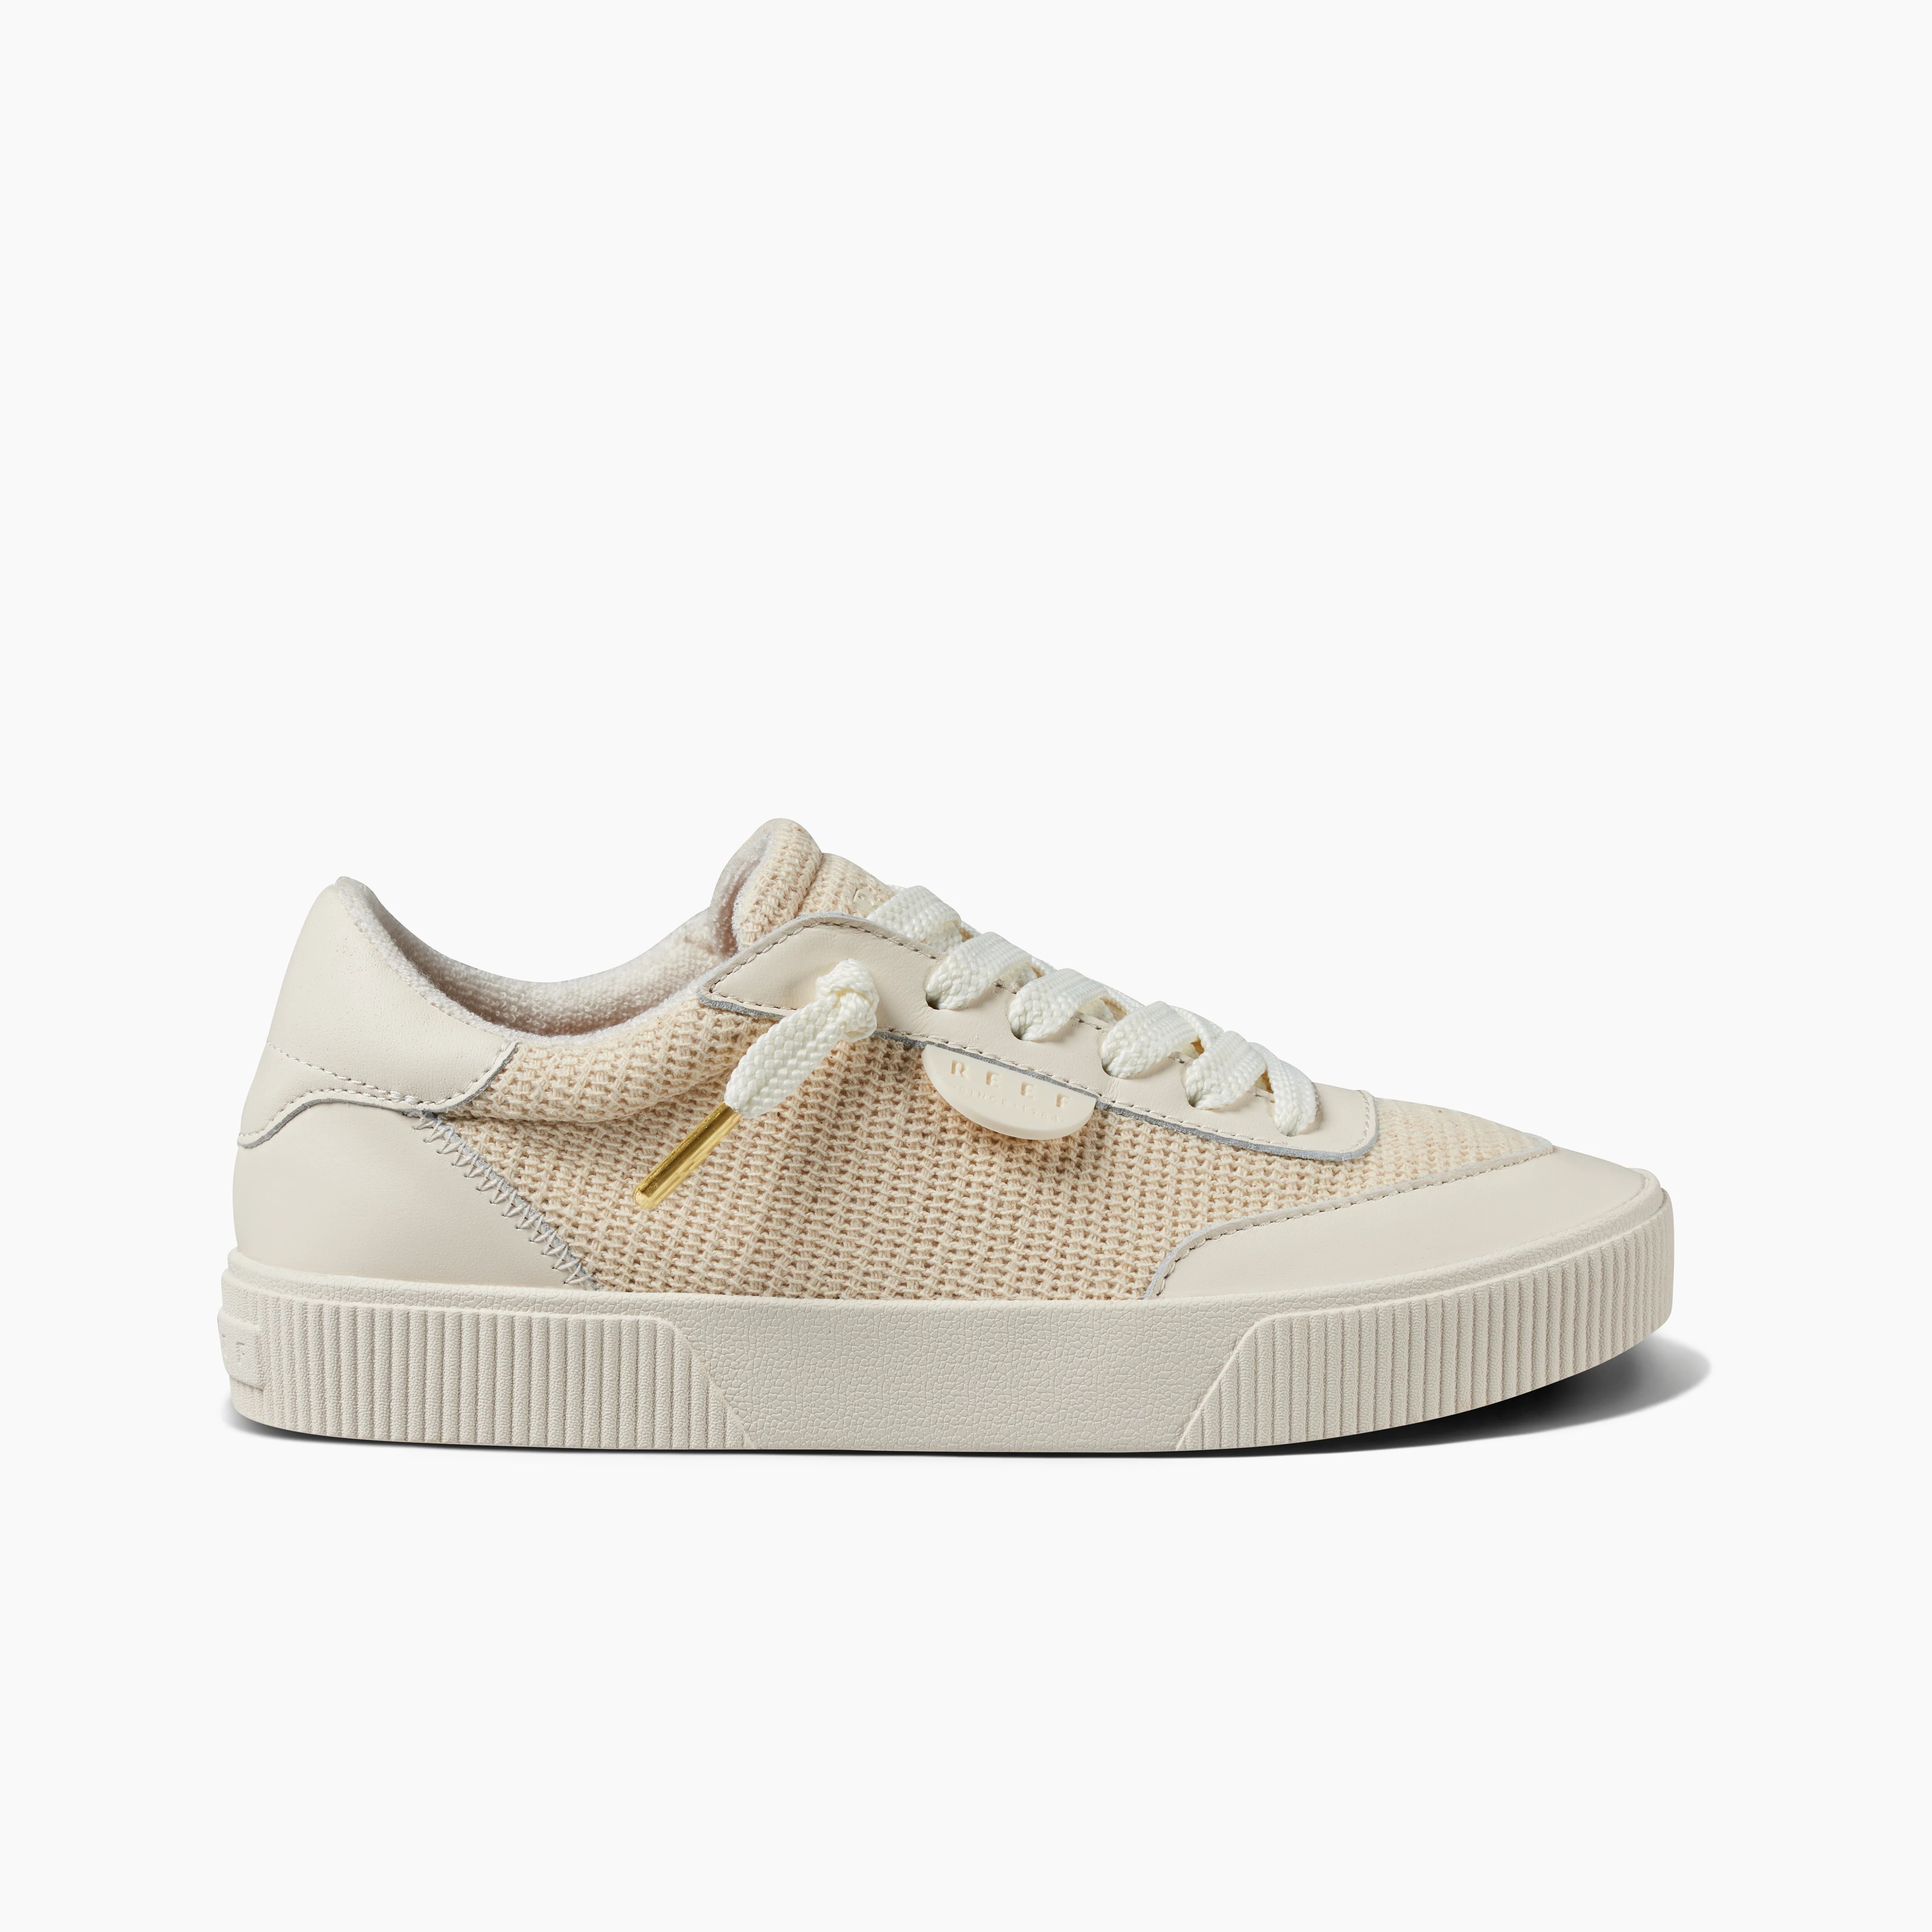 Lay Day Seas Vintage Woven Women's Shoes | REEF® | Reef